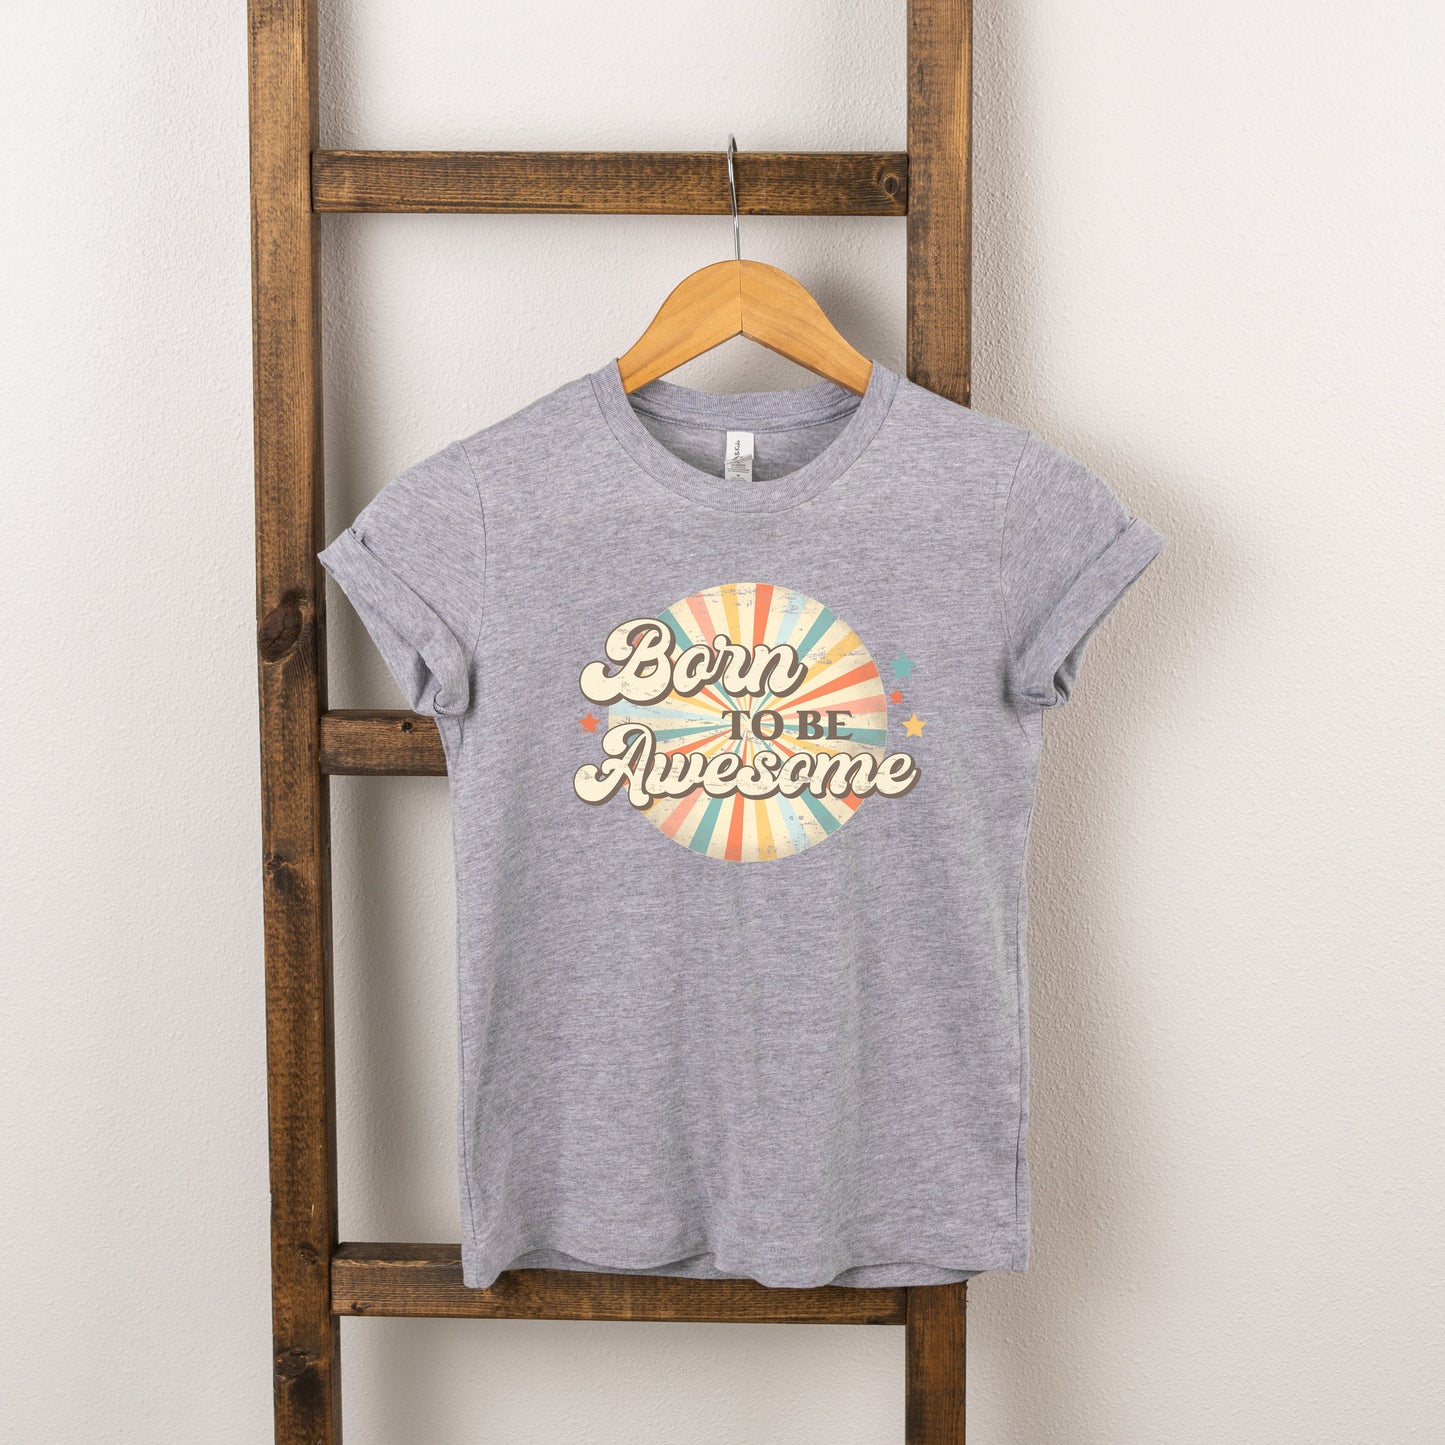 Born To Be Awesome | Youth Short Sleeve Crew Neck